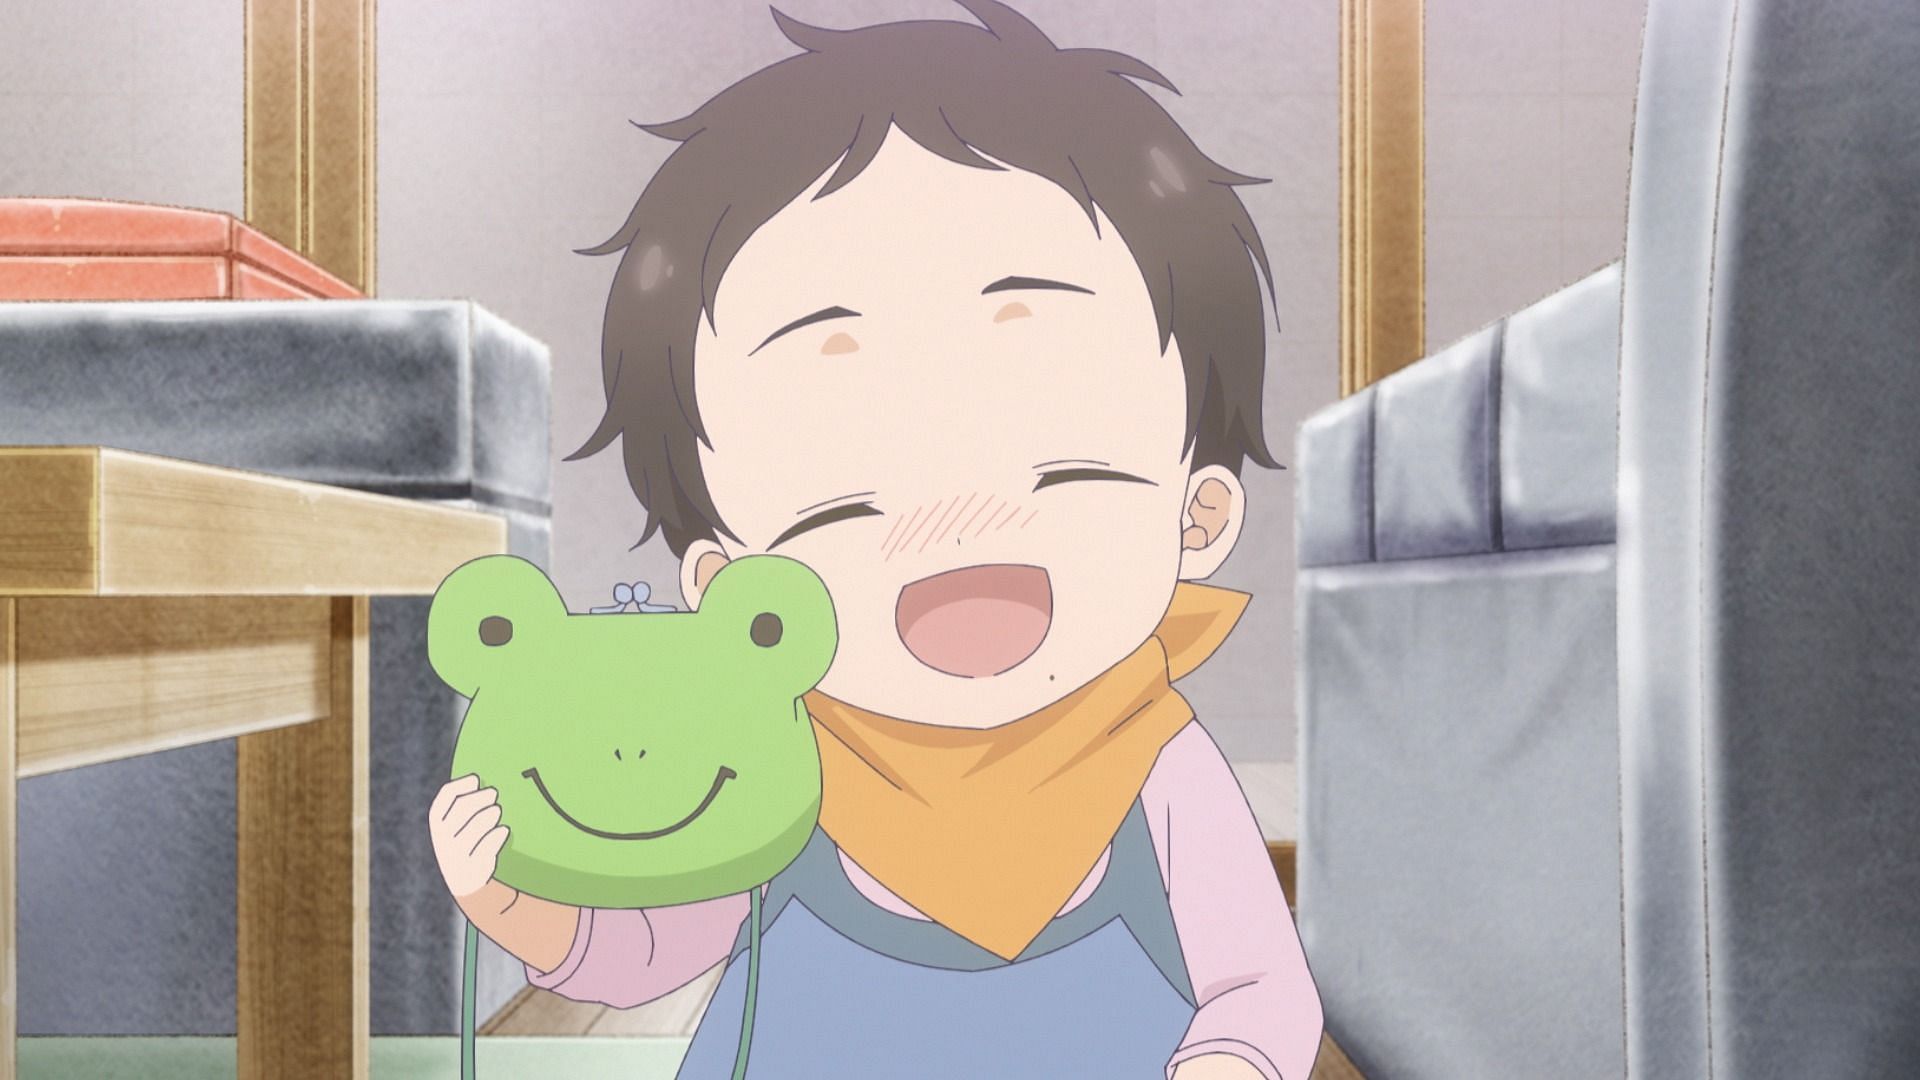 Tadaima, Okaeri episode 8: Release date and time, where to watch, and more